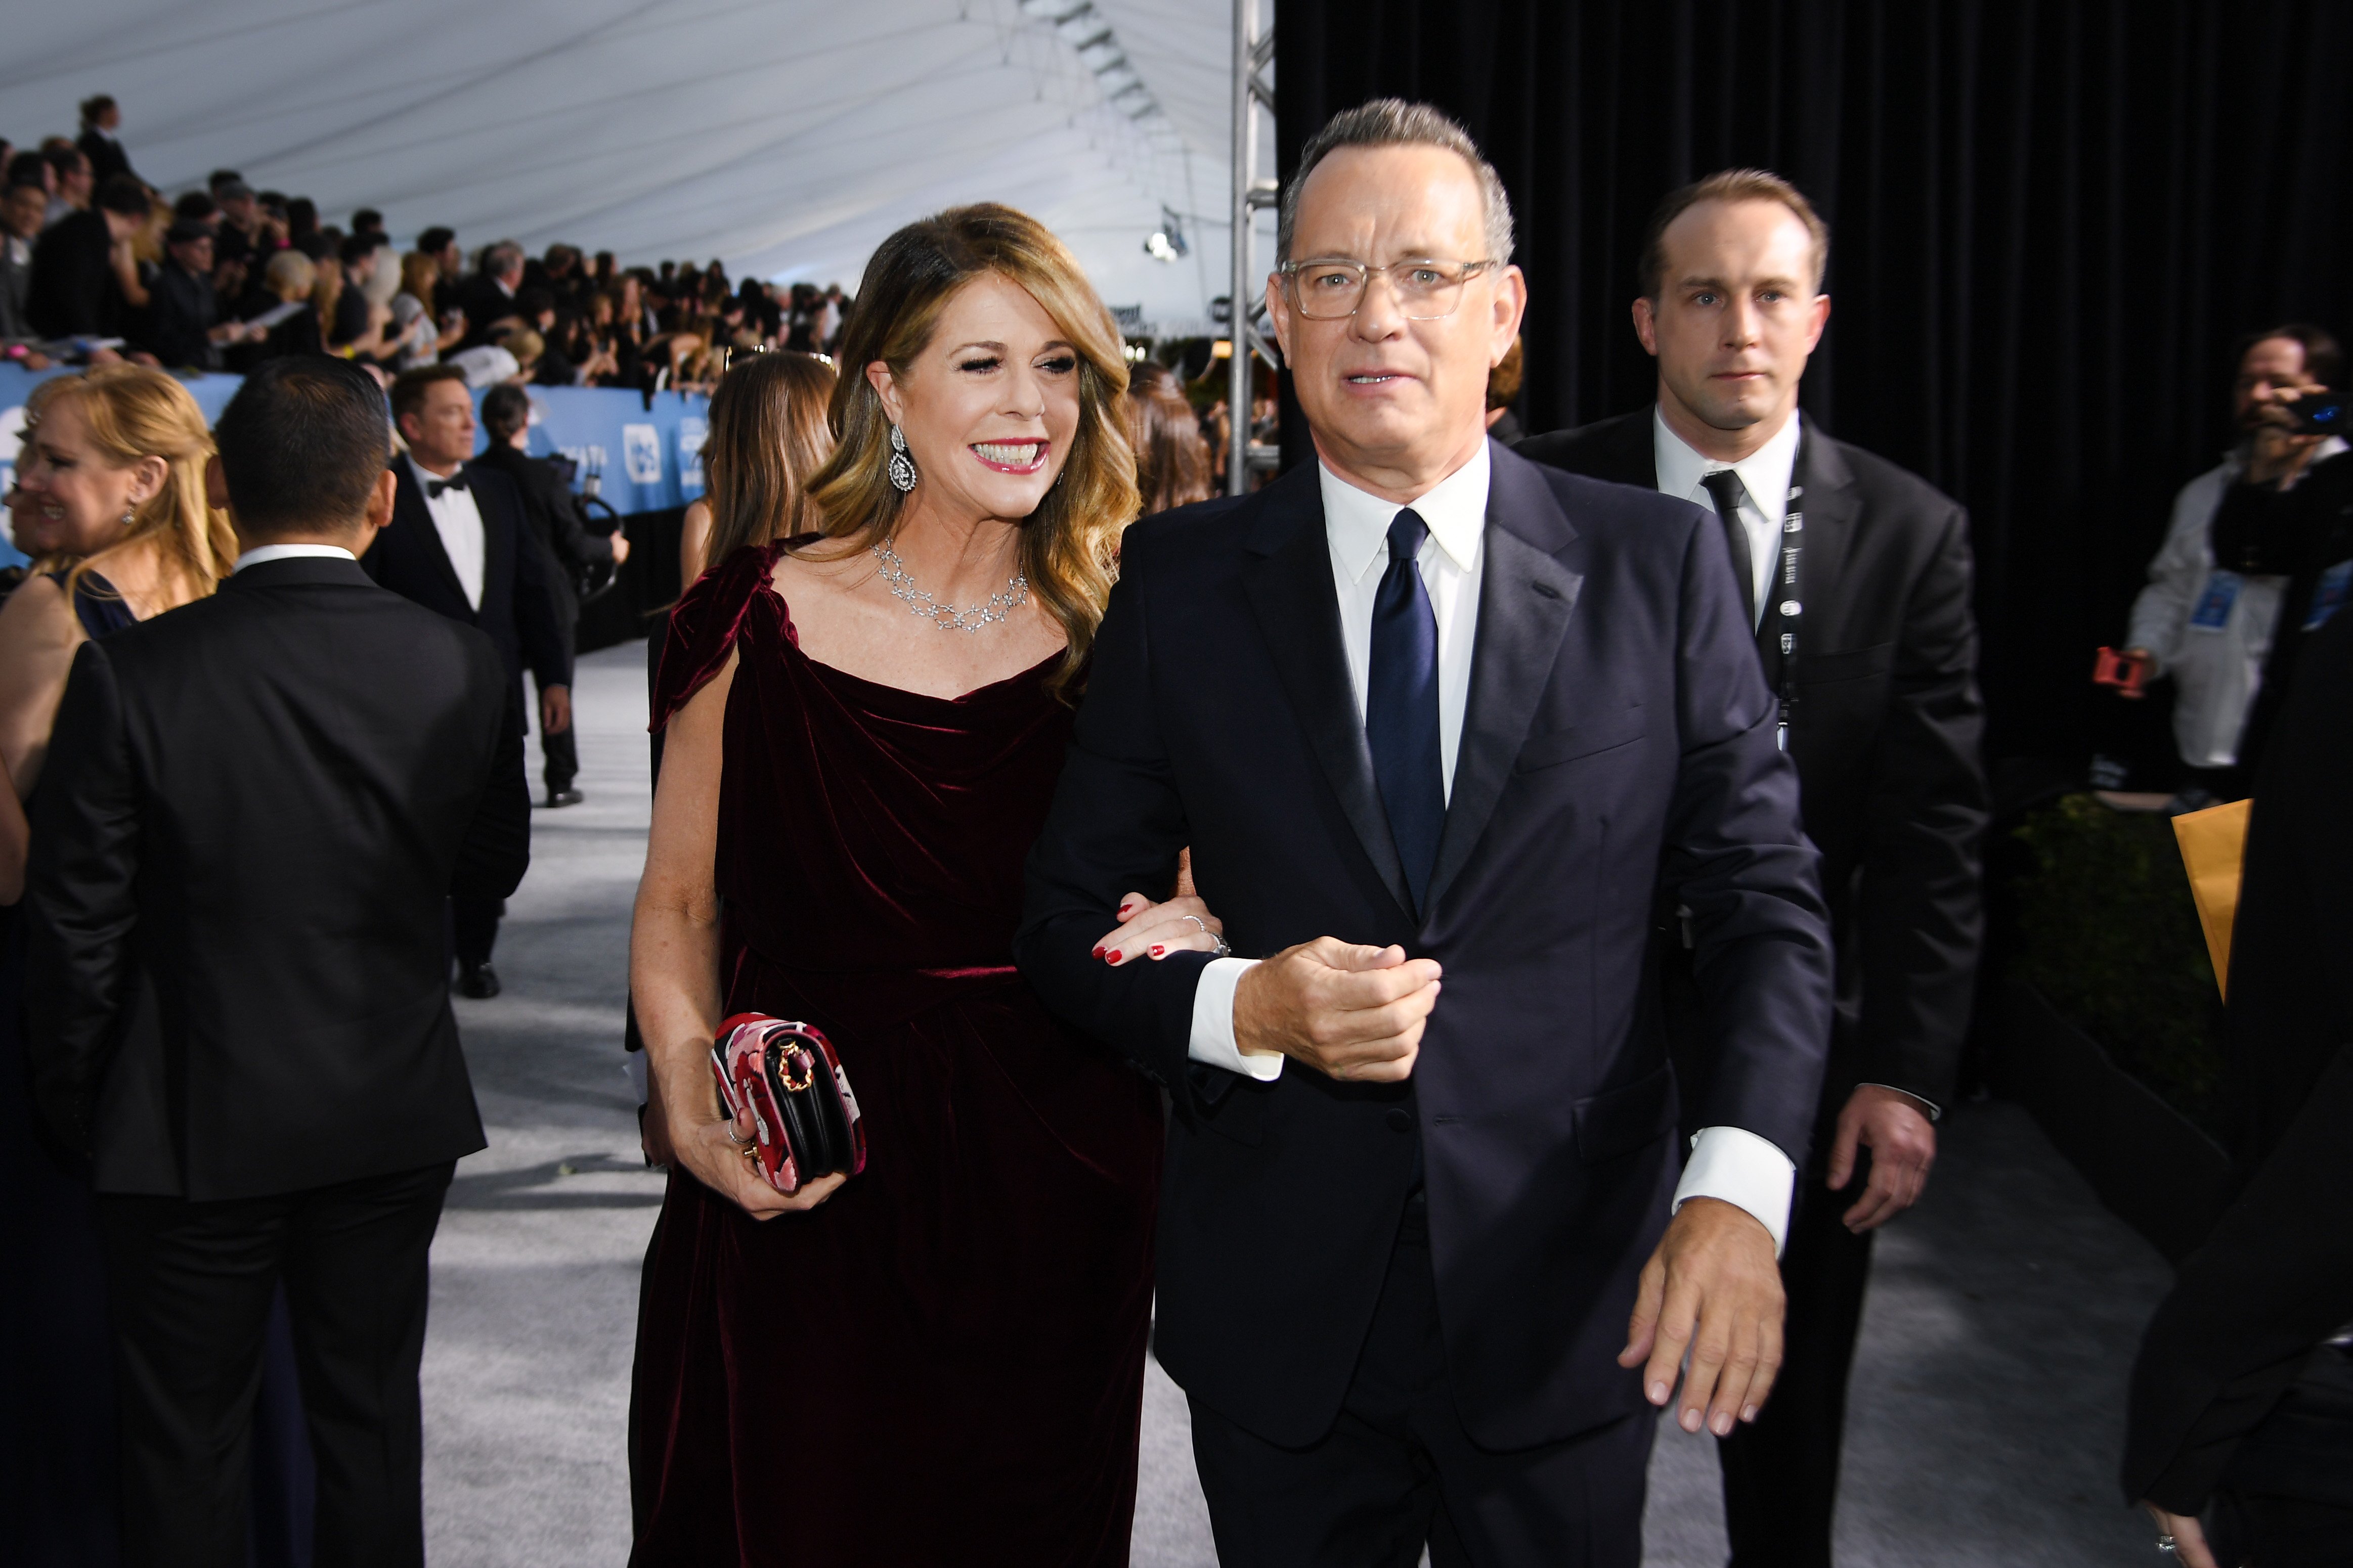 Rita Wilson and Tom Hanks attend the 26th Annual Screen Actors Guild Awards at The Shrine Auditorium on January 19, 2020 in Los Angeles, California | Photo: GettyImages